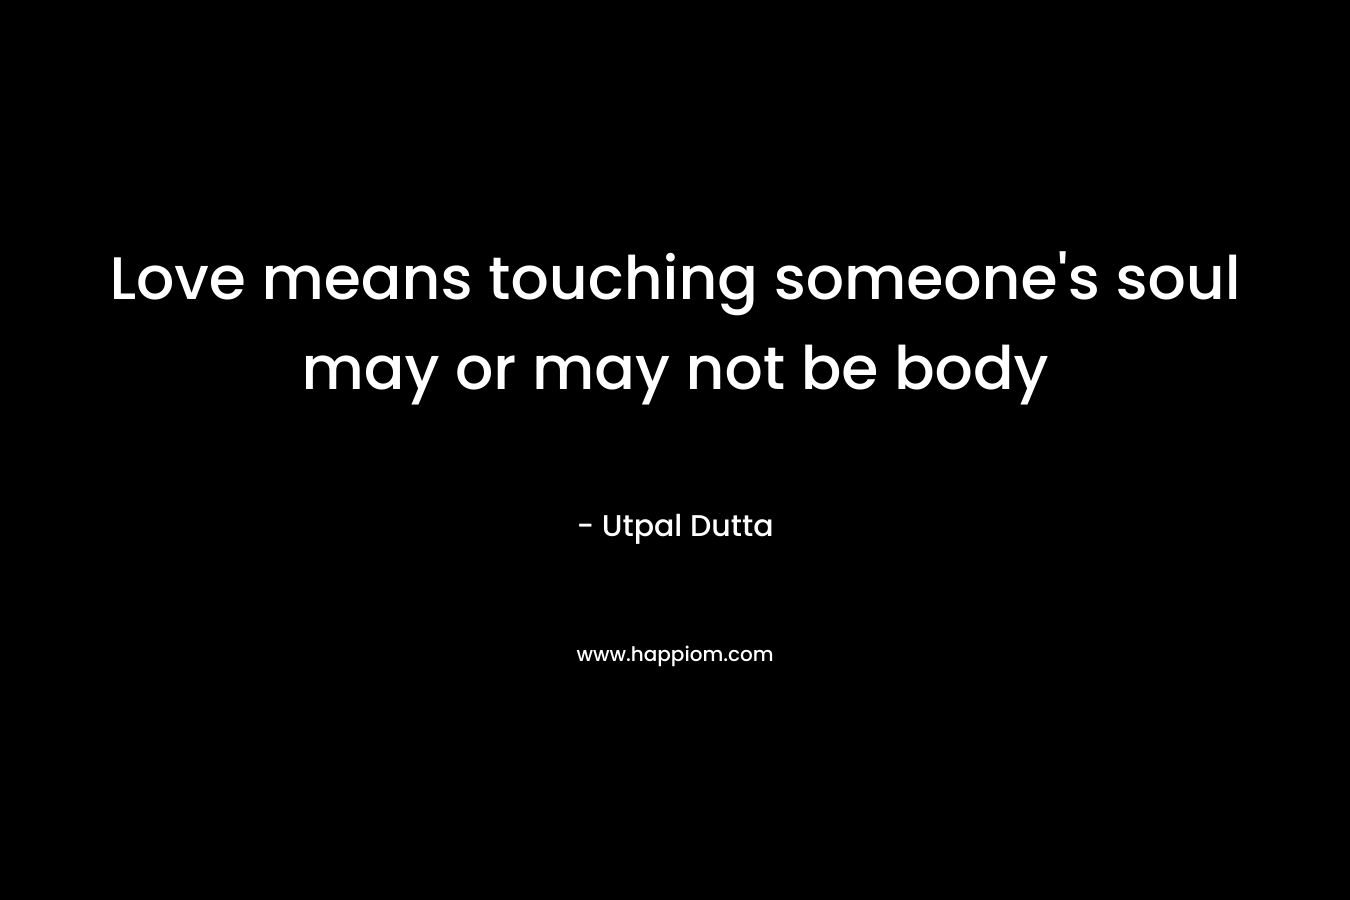 Love means touching someone's soul may or may not be body